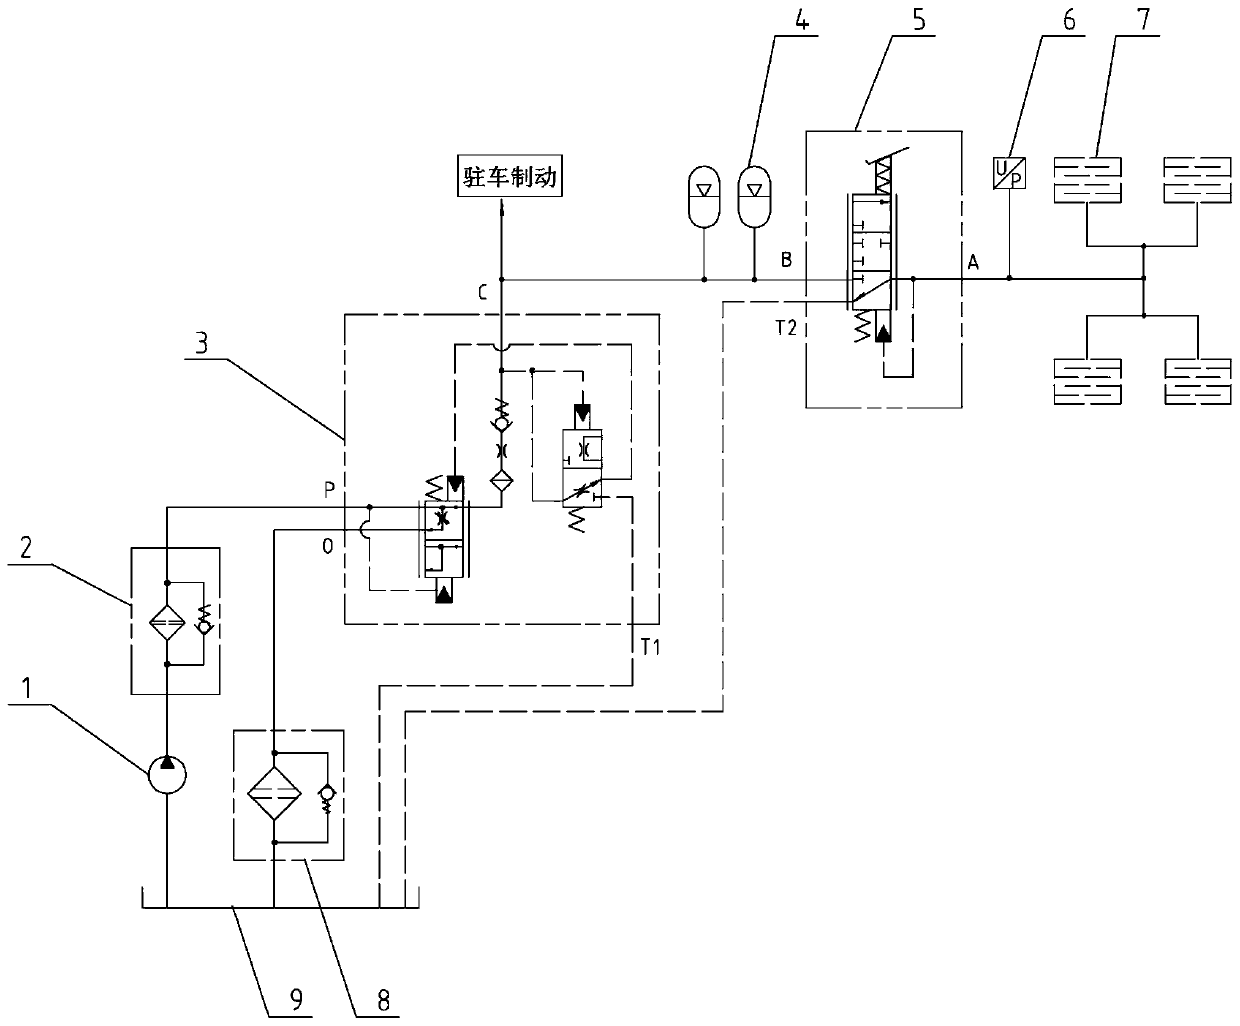 Output power cut-off control system and method of construction machinery gearbox